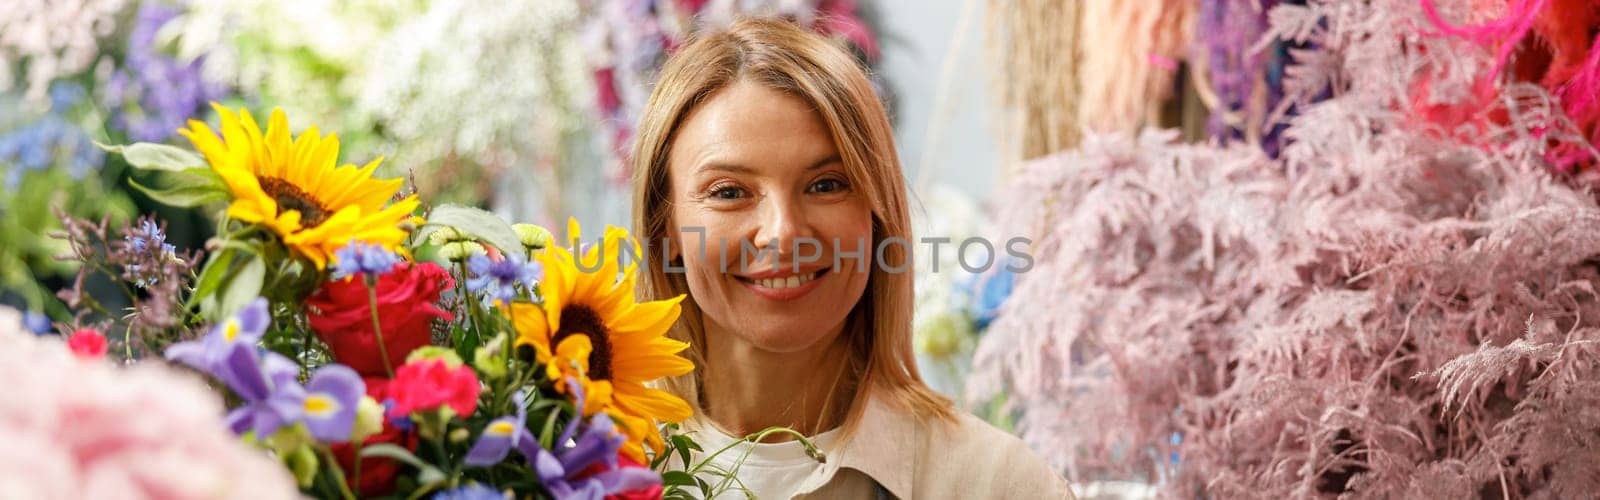 Female decorator creating beautiful bouquet at table. Lifestyle flower shop